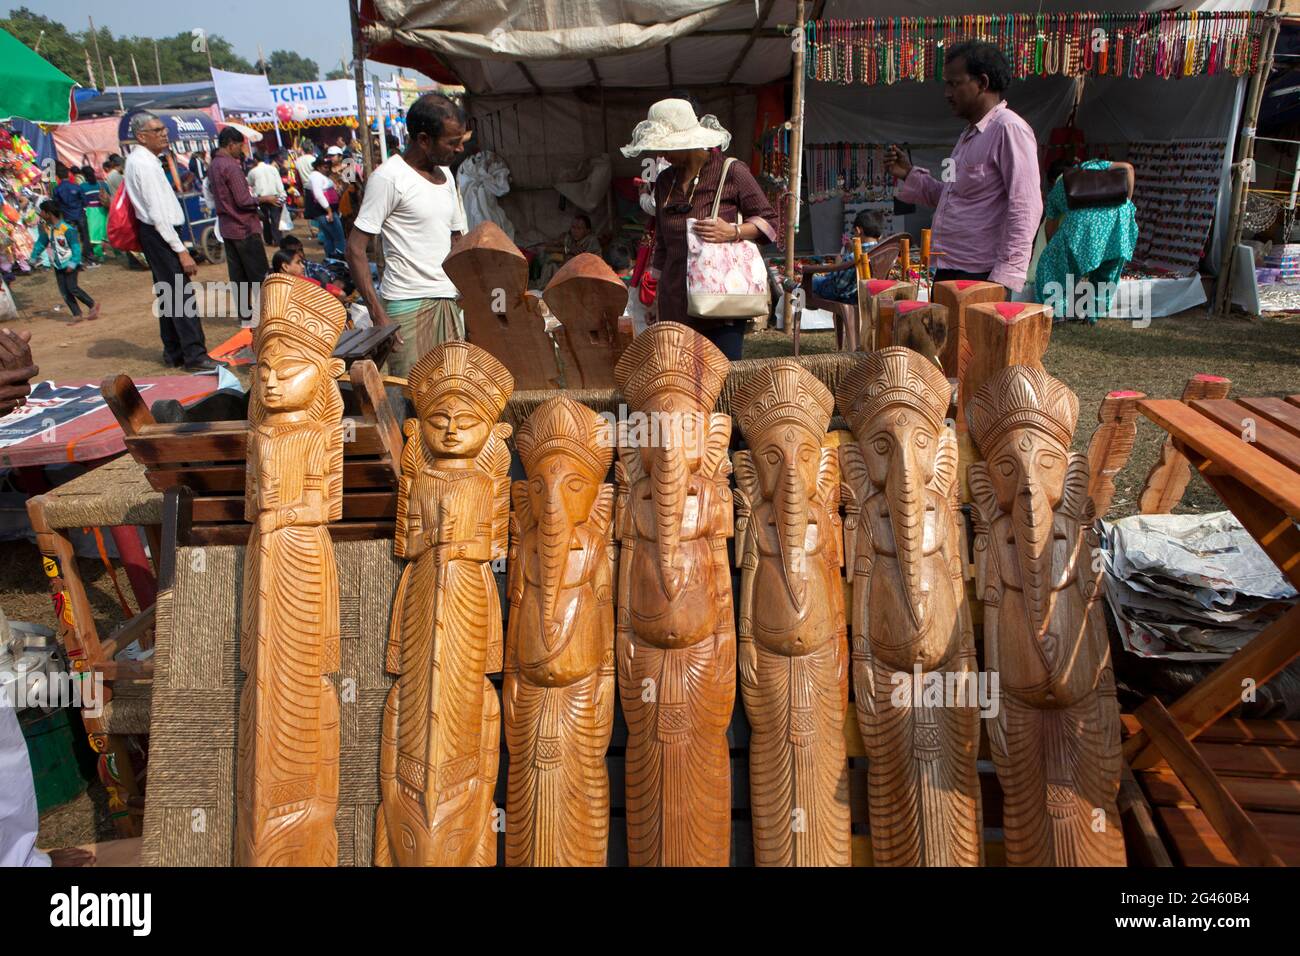 Stalls selling traditional wooden crafts in Poush Mela, a historical rural fair of about 127 years old at Shantiniketan, West Bengal, India. Stock Photo